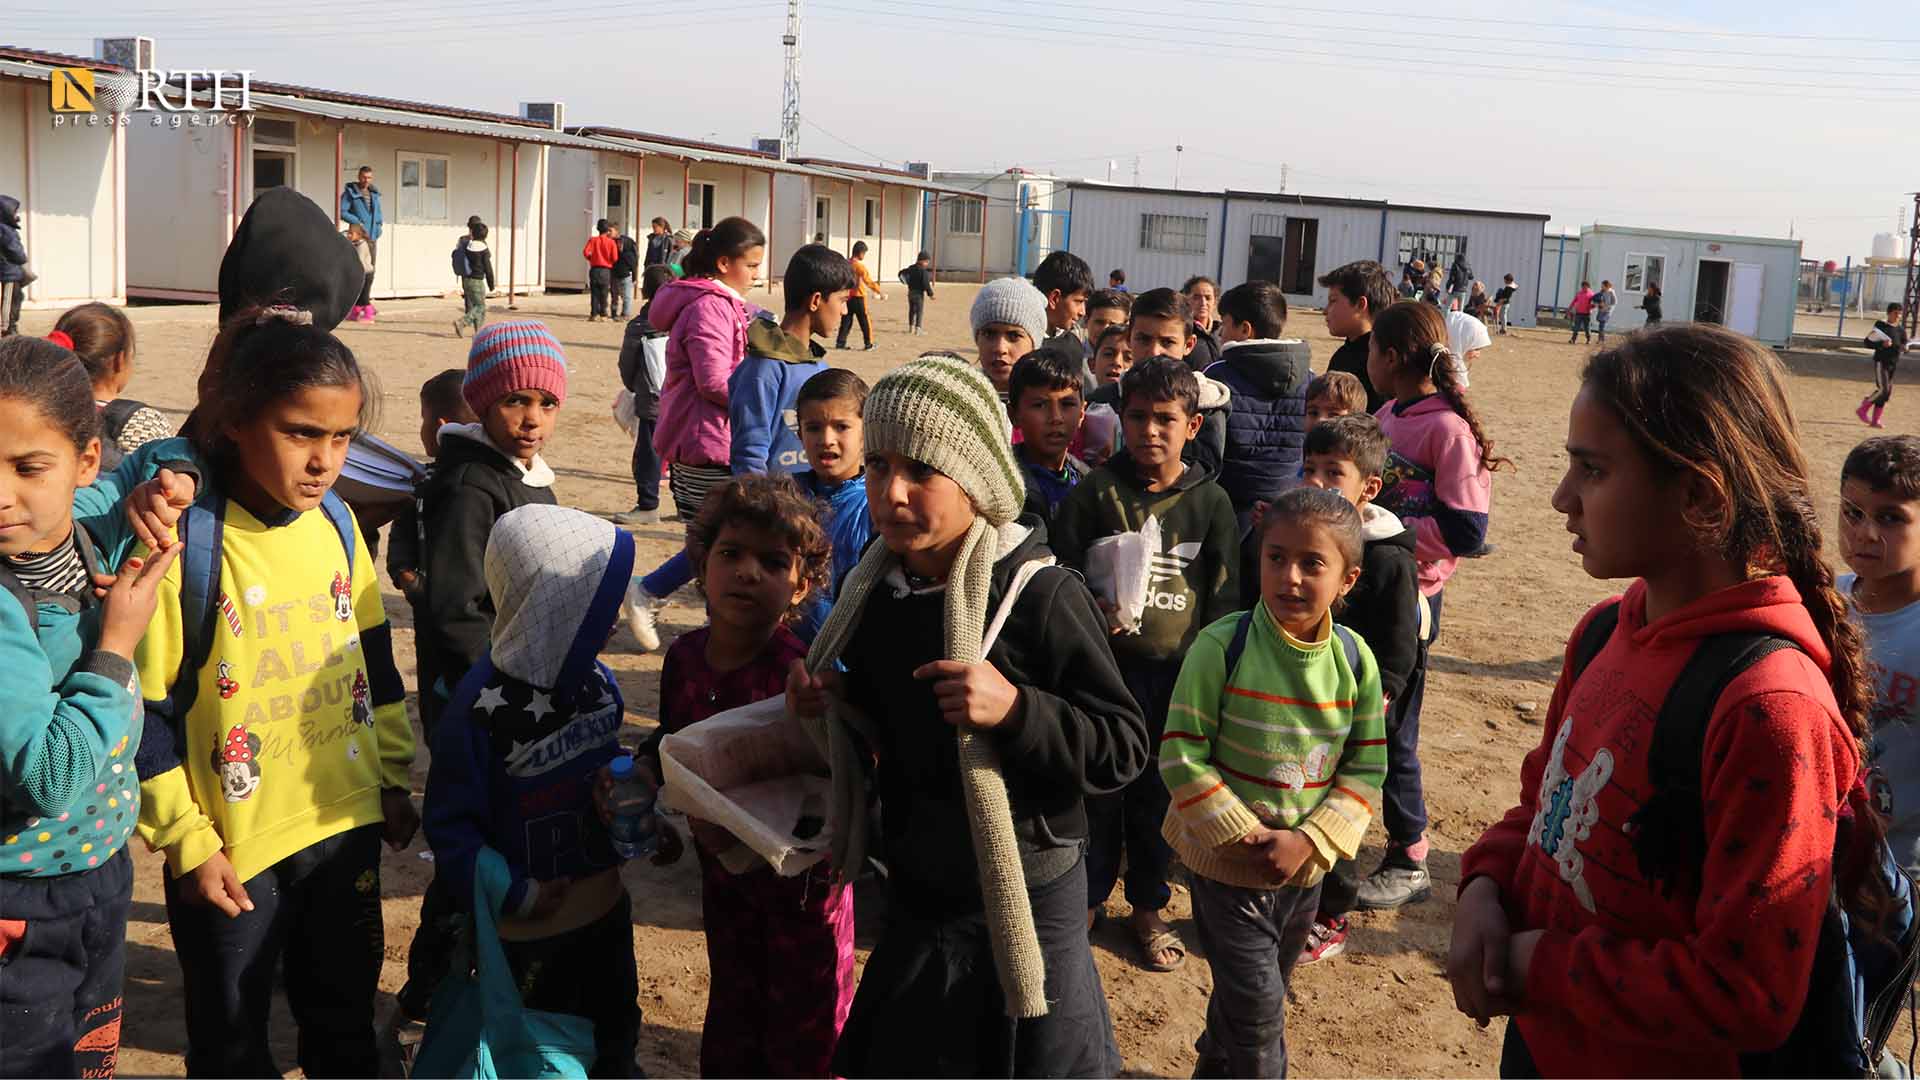 Mass displacement causes overcrowding in an IDP camp’s school northeast Syria (North Press)